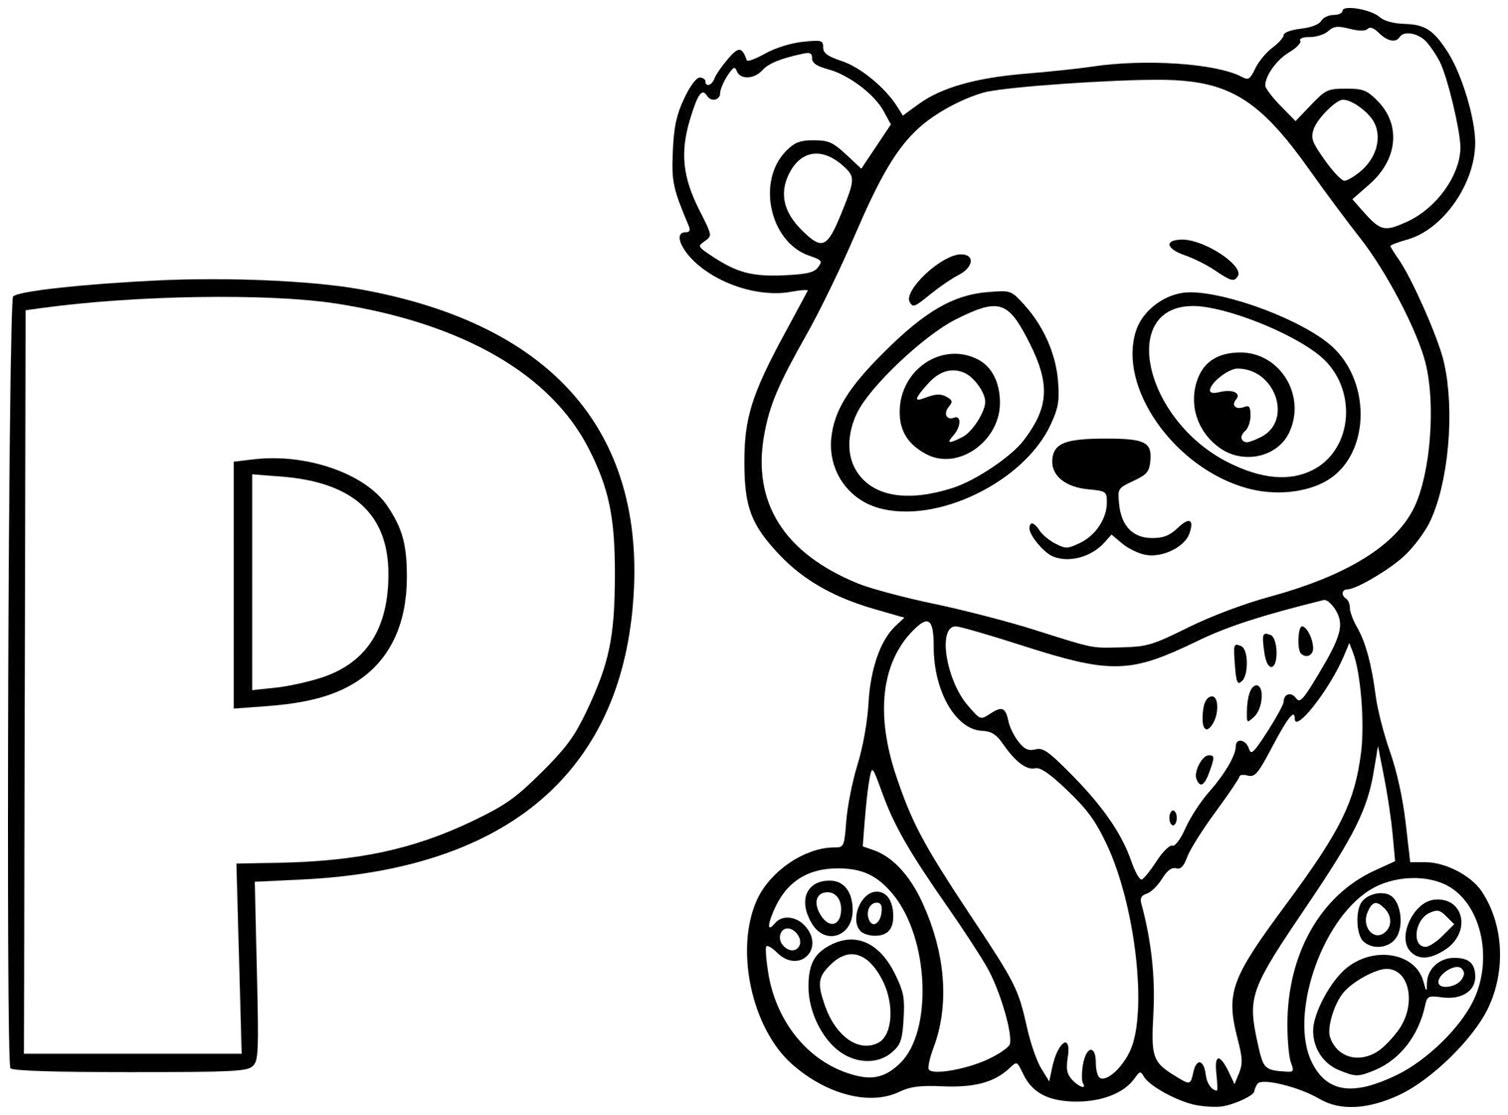 491 Cartoon Free Printable Panda Coloring Pages with Printable